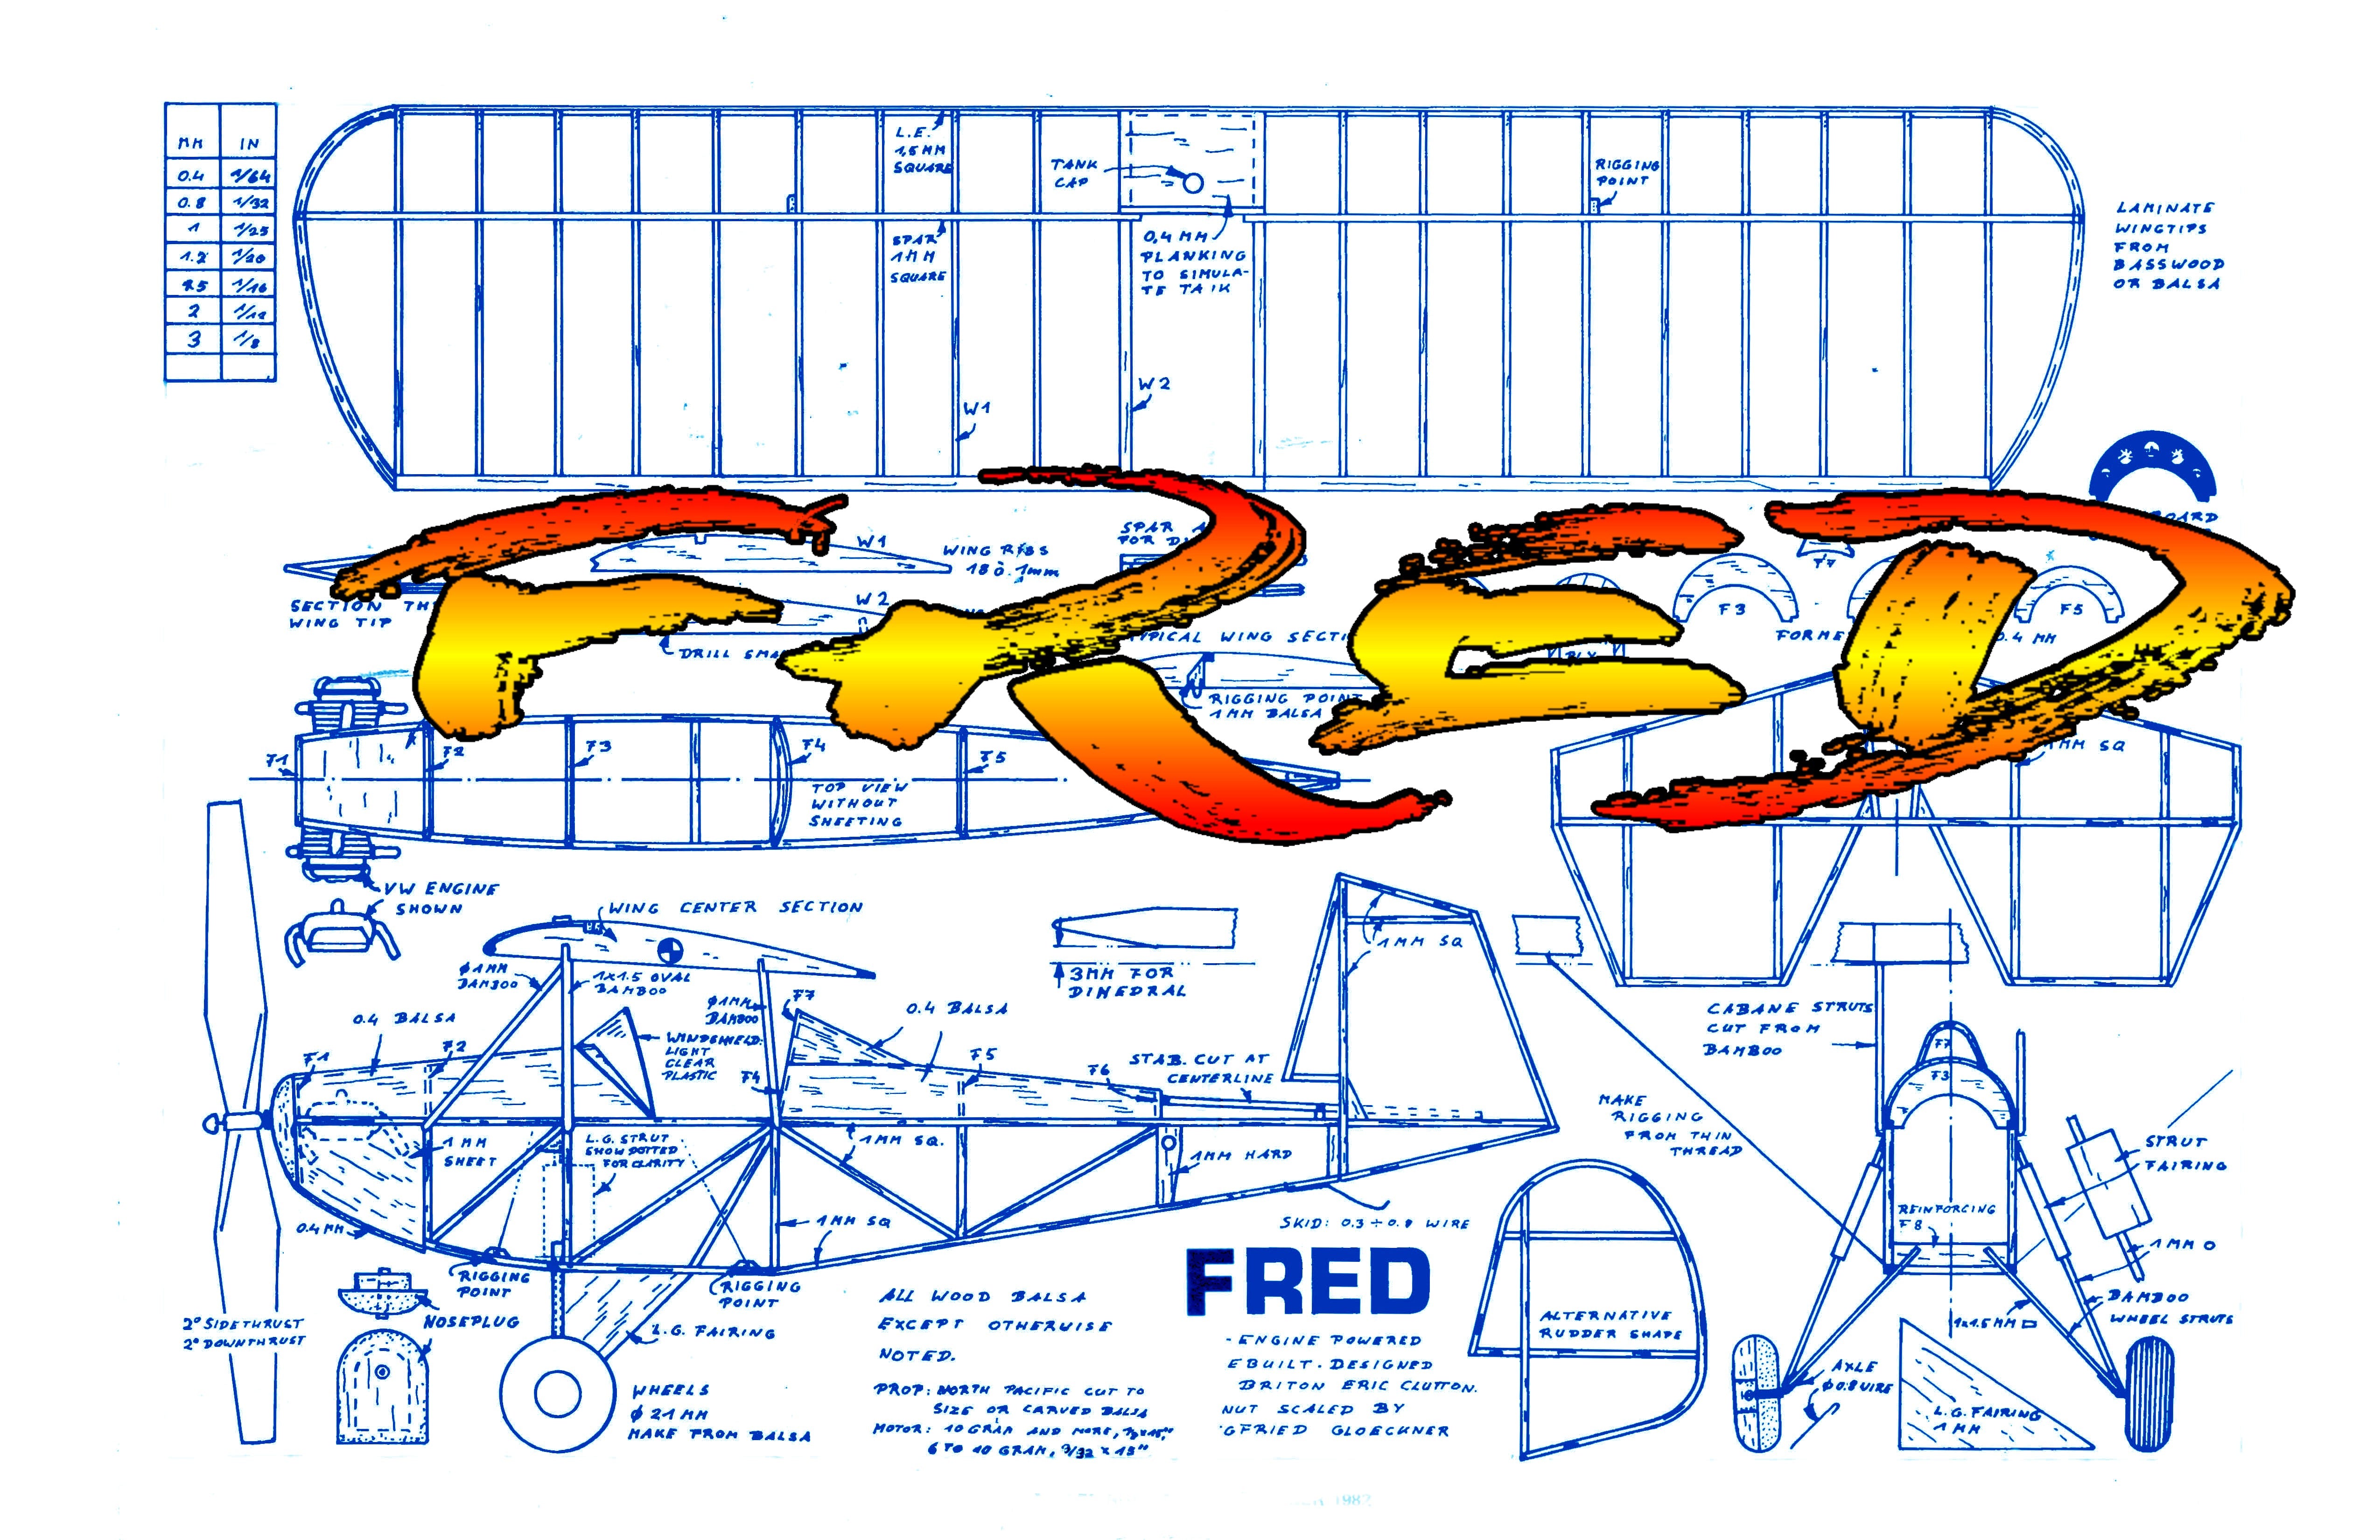 full size printed plans vintaage 1982 "fred" unorthodox construction sequences are described